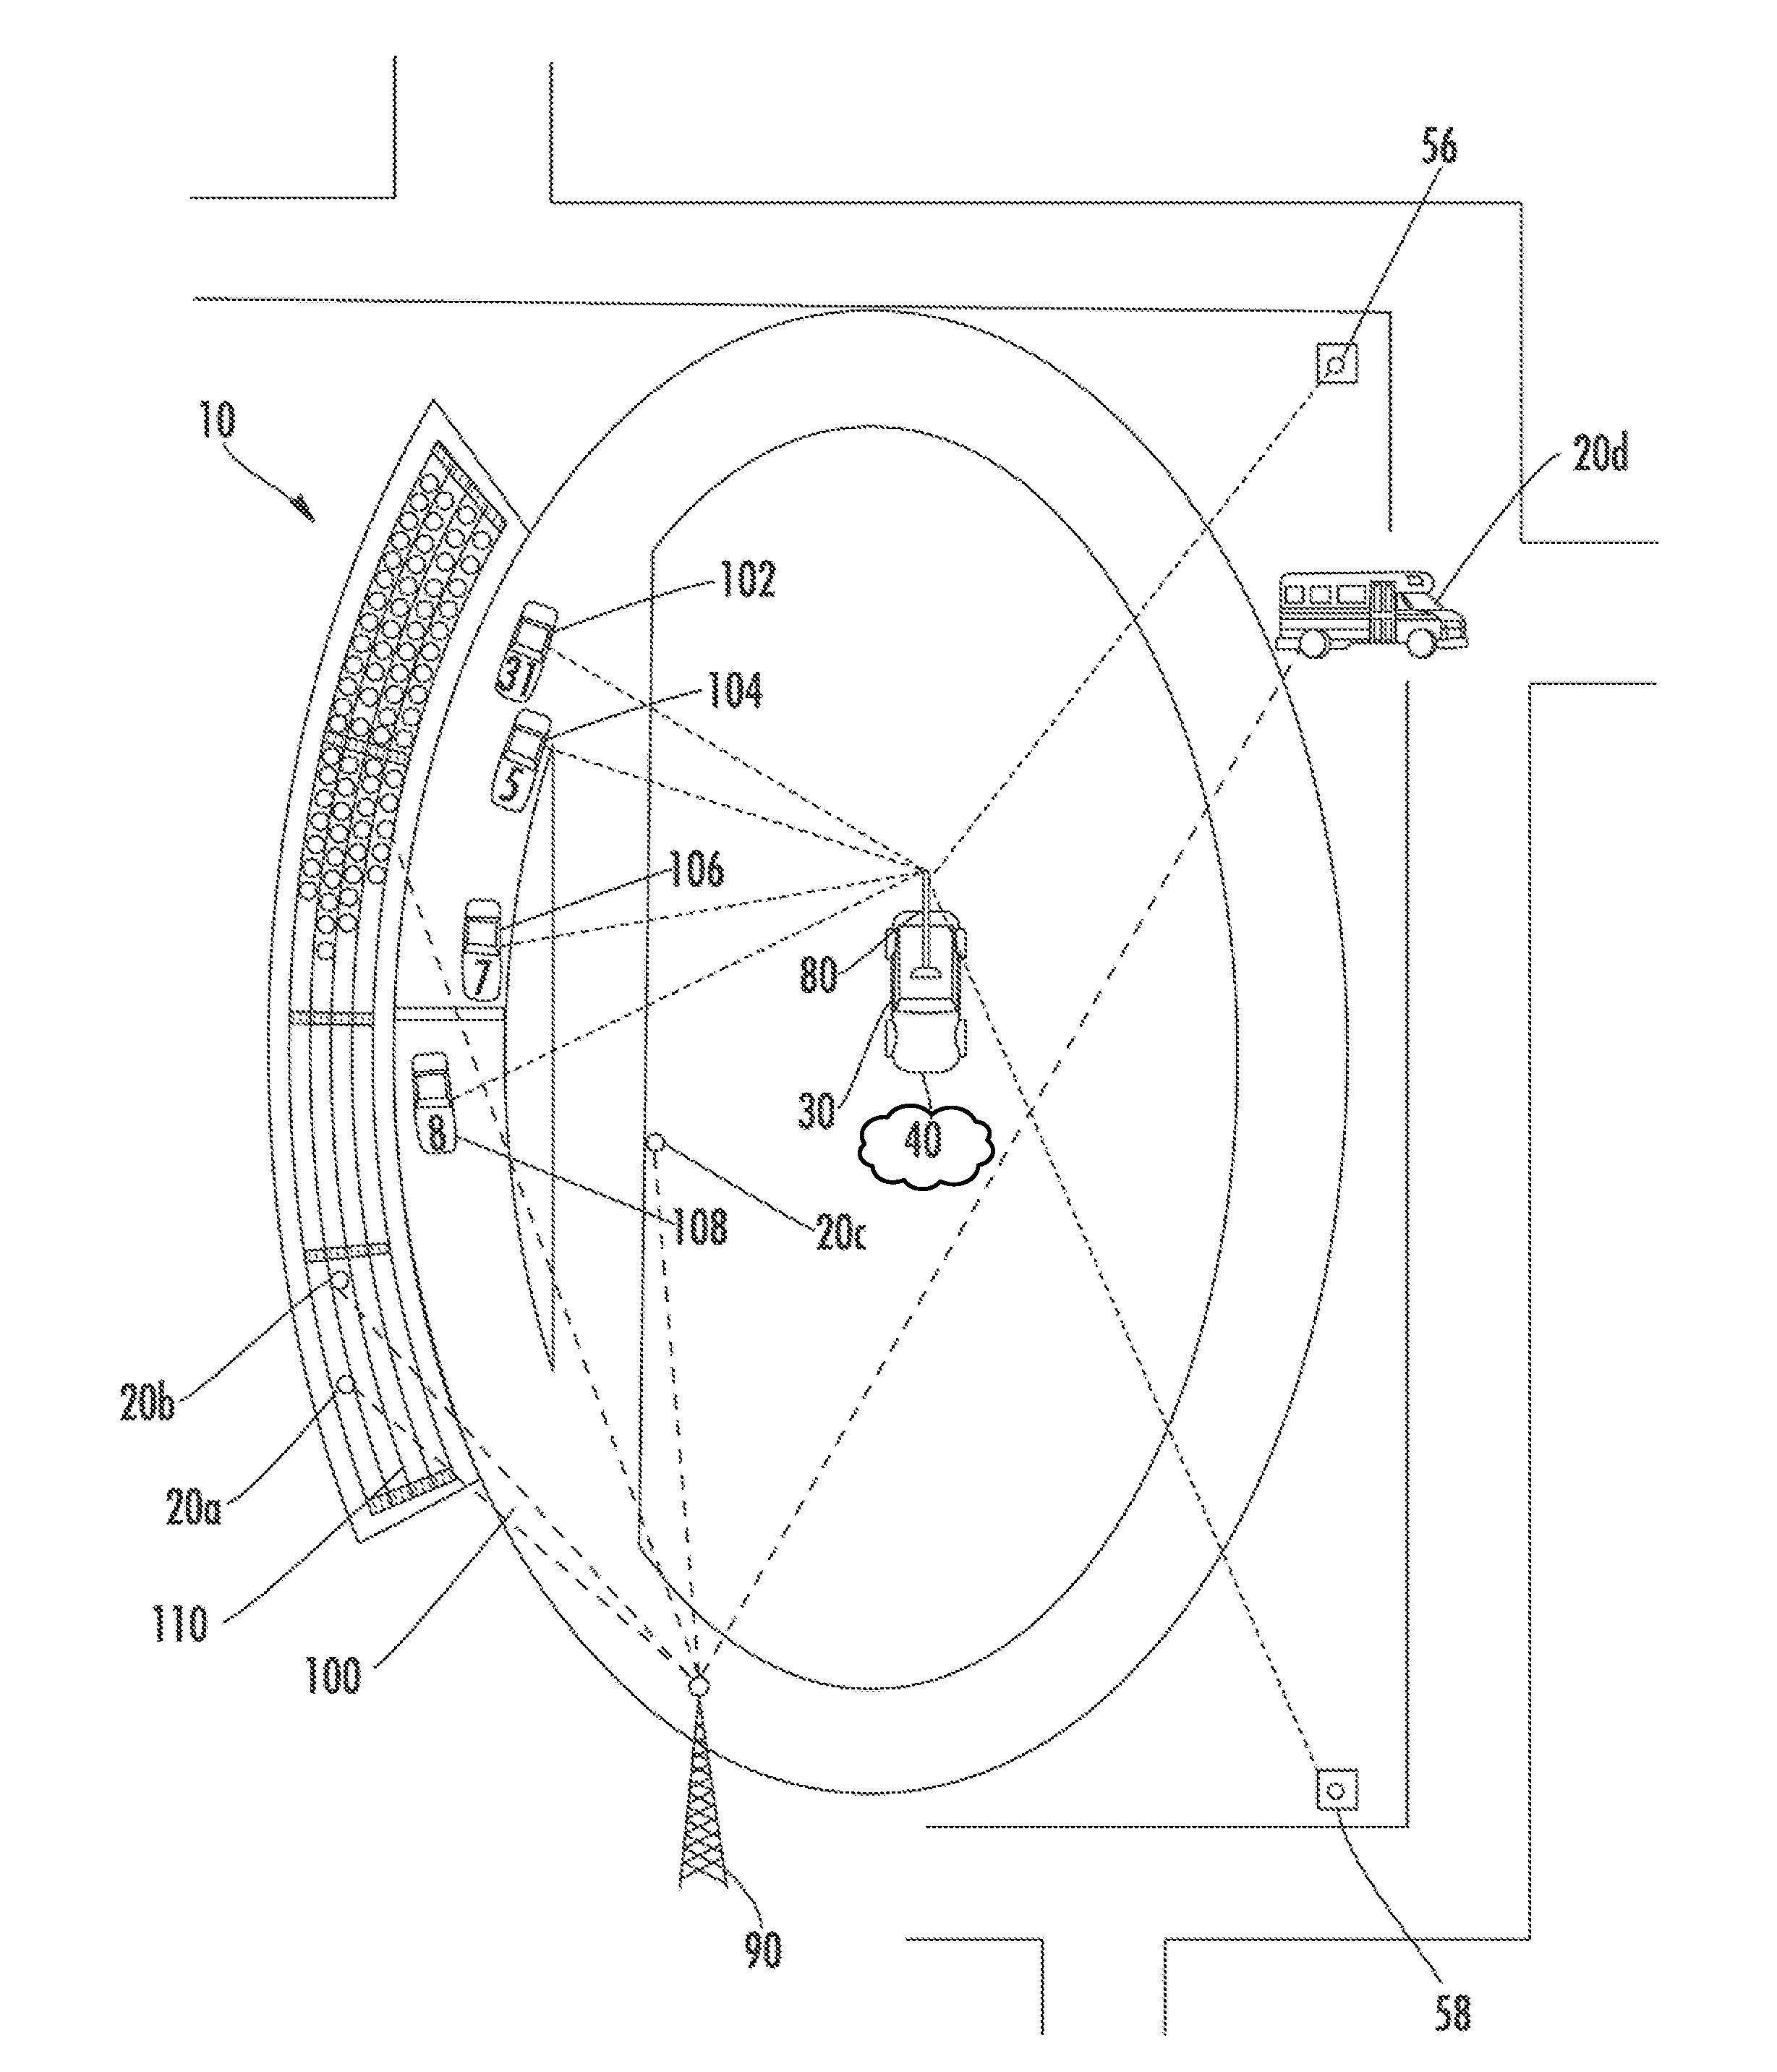 Method for providing multiple viewing opportunities of events at a venue